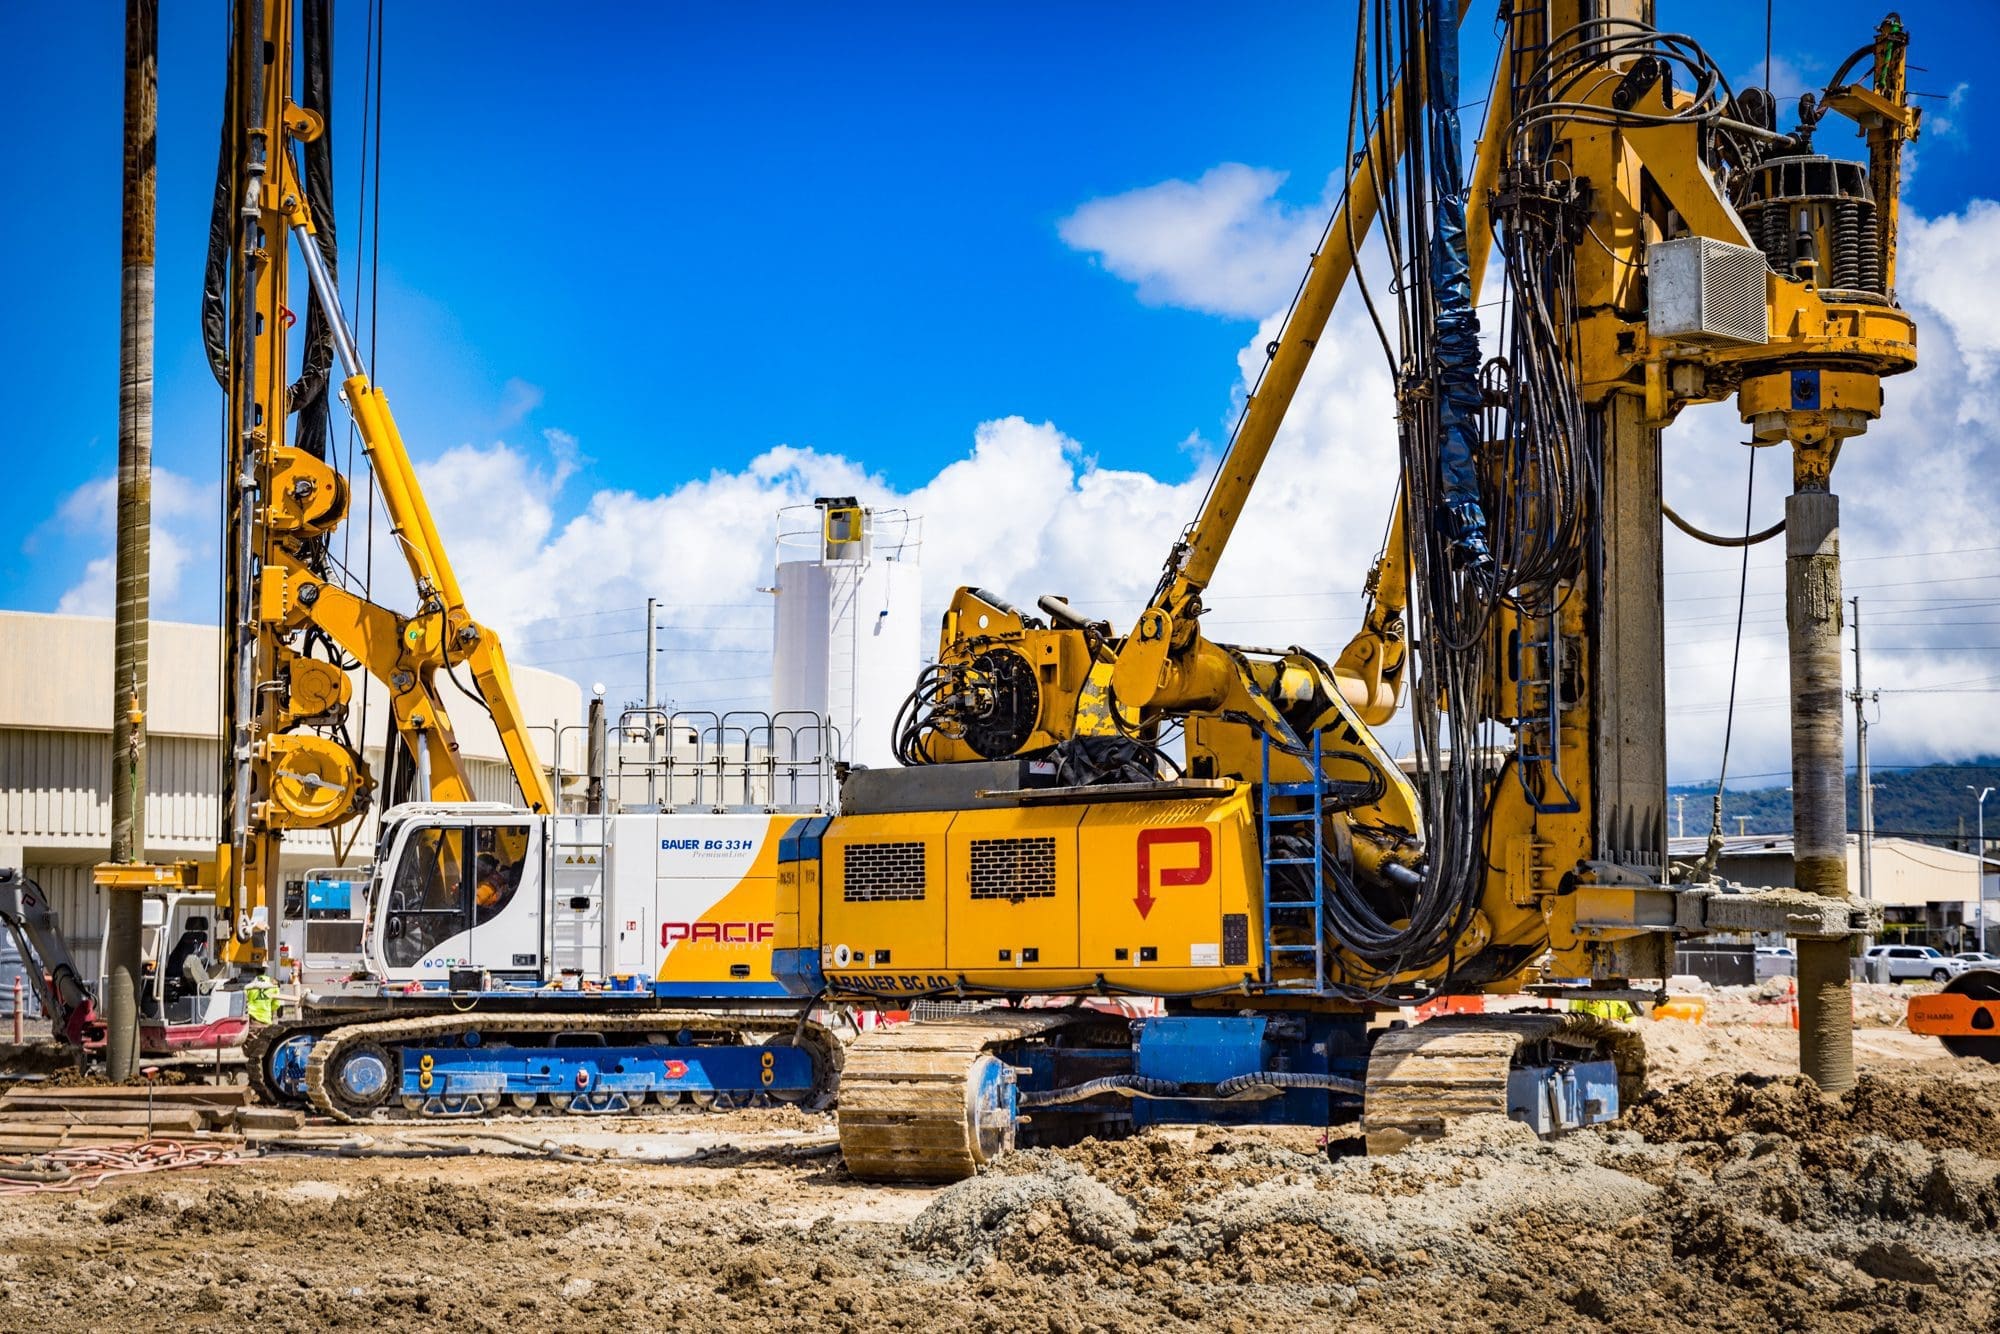 Vertical Drill Rigs perform deep cement mixing at the Sand Island WWTP in Honolulu, Hawaii